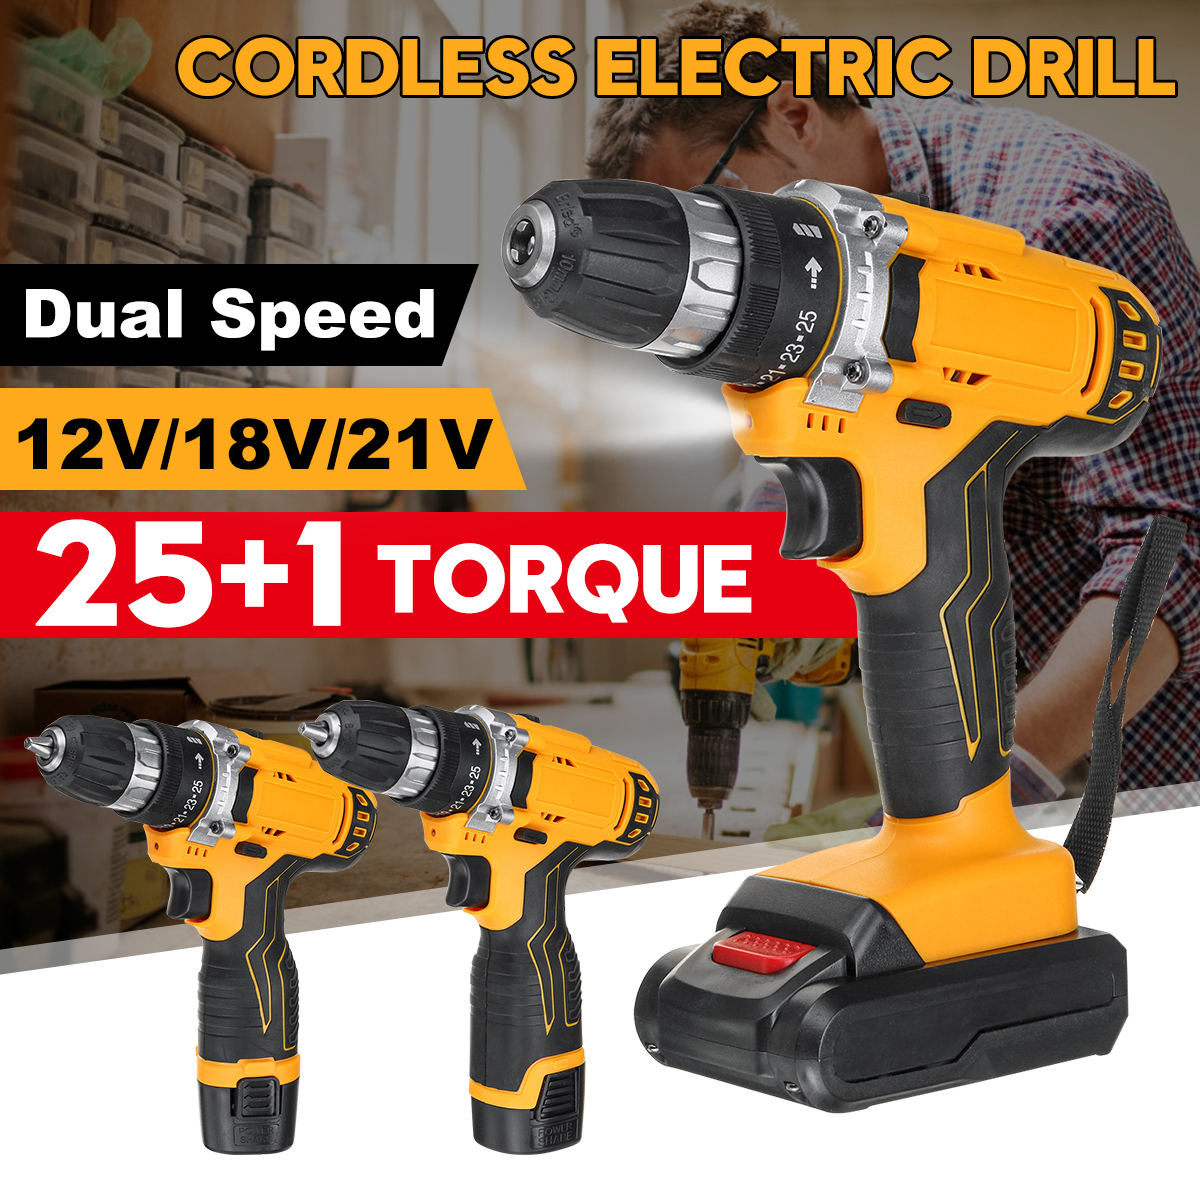 121821V-251-Torque-2-Speed-Cordless-Electric-Drill-Screwdriver-W-LED-Light-1733758-2